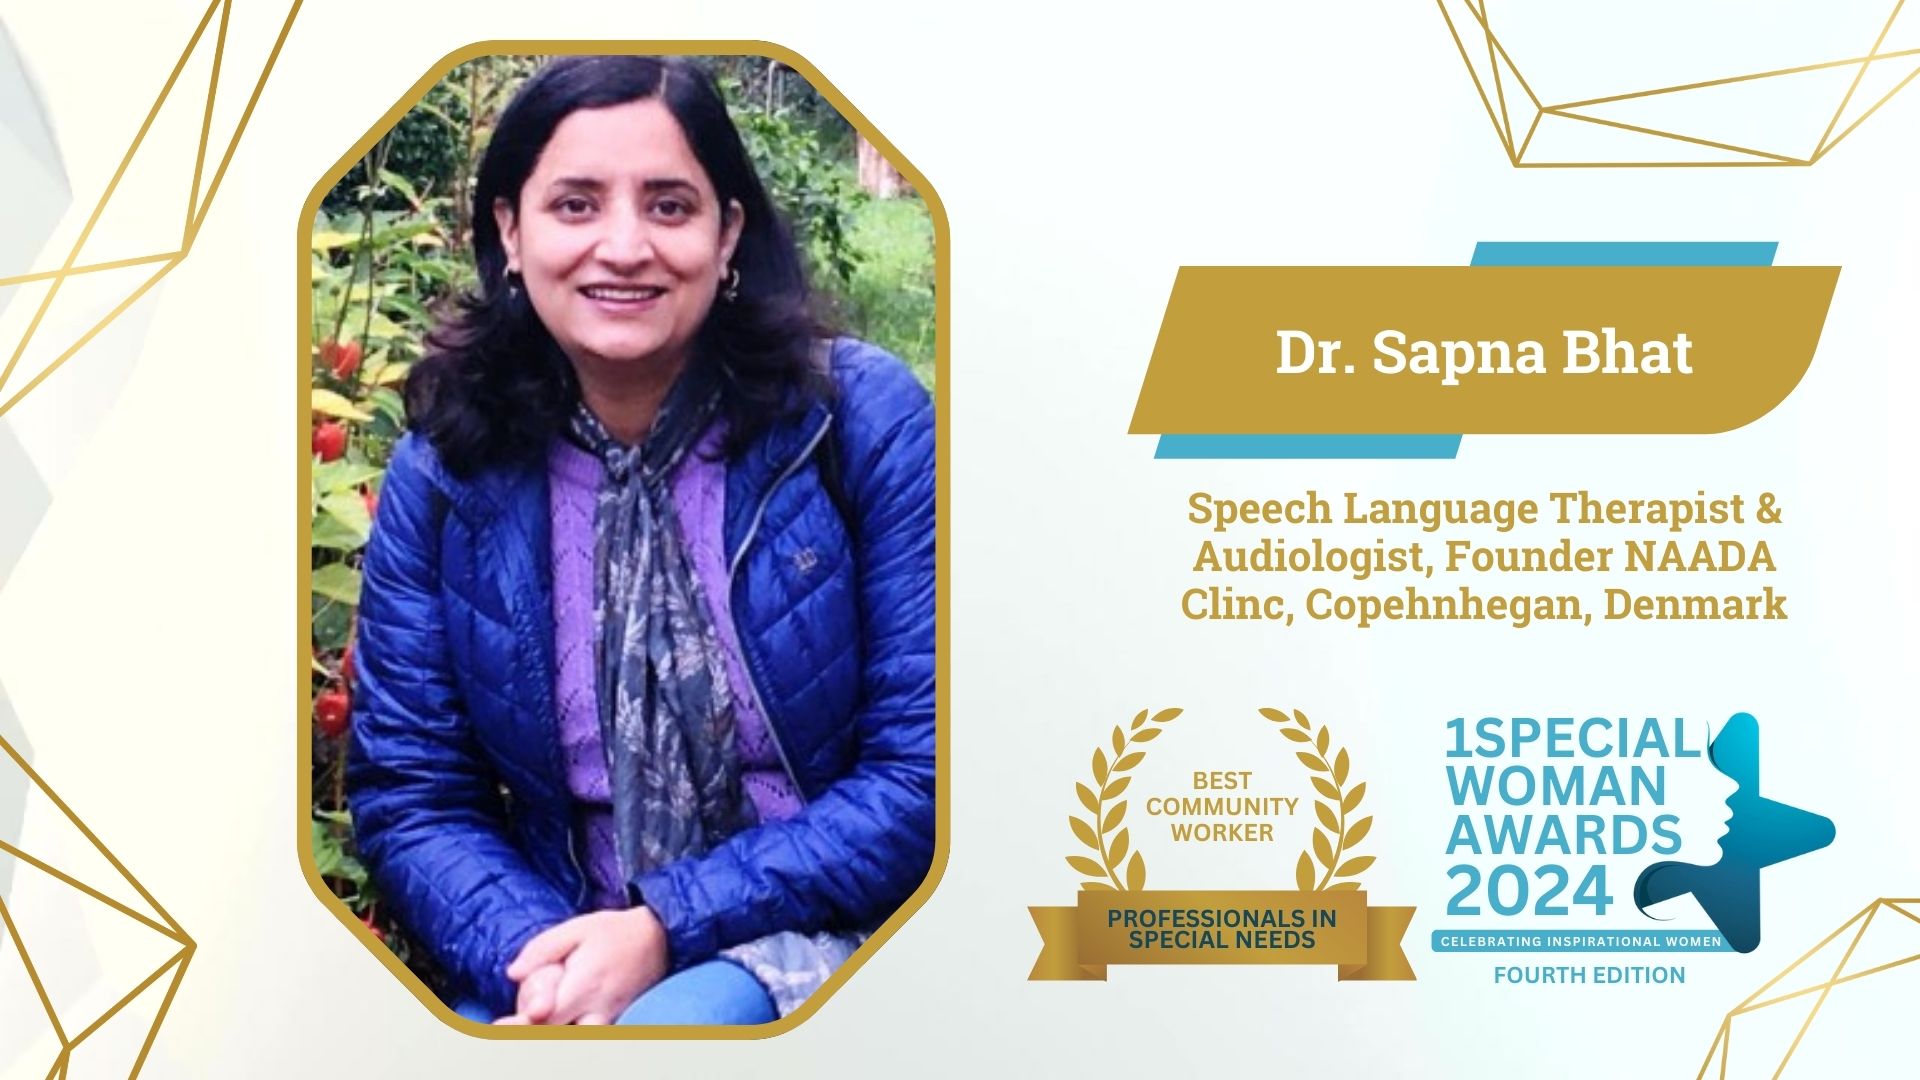 One special award 2024 winner Dr Sapna Bhat at 1special place